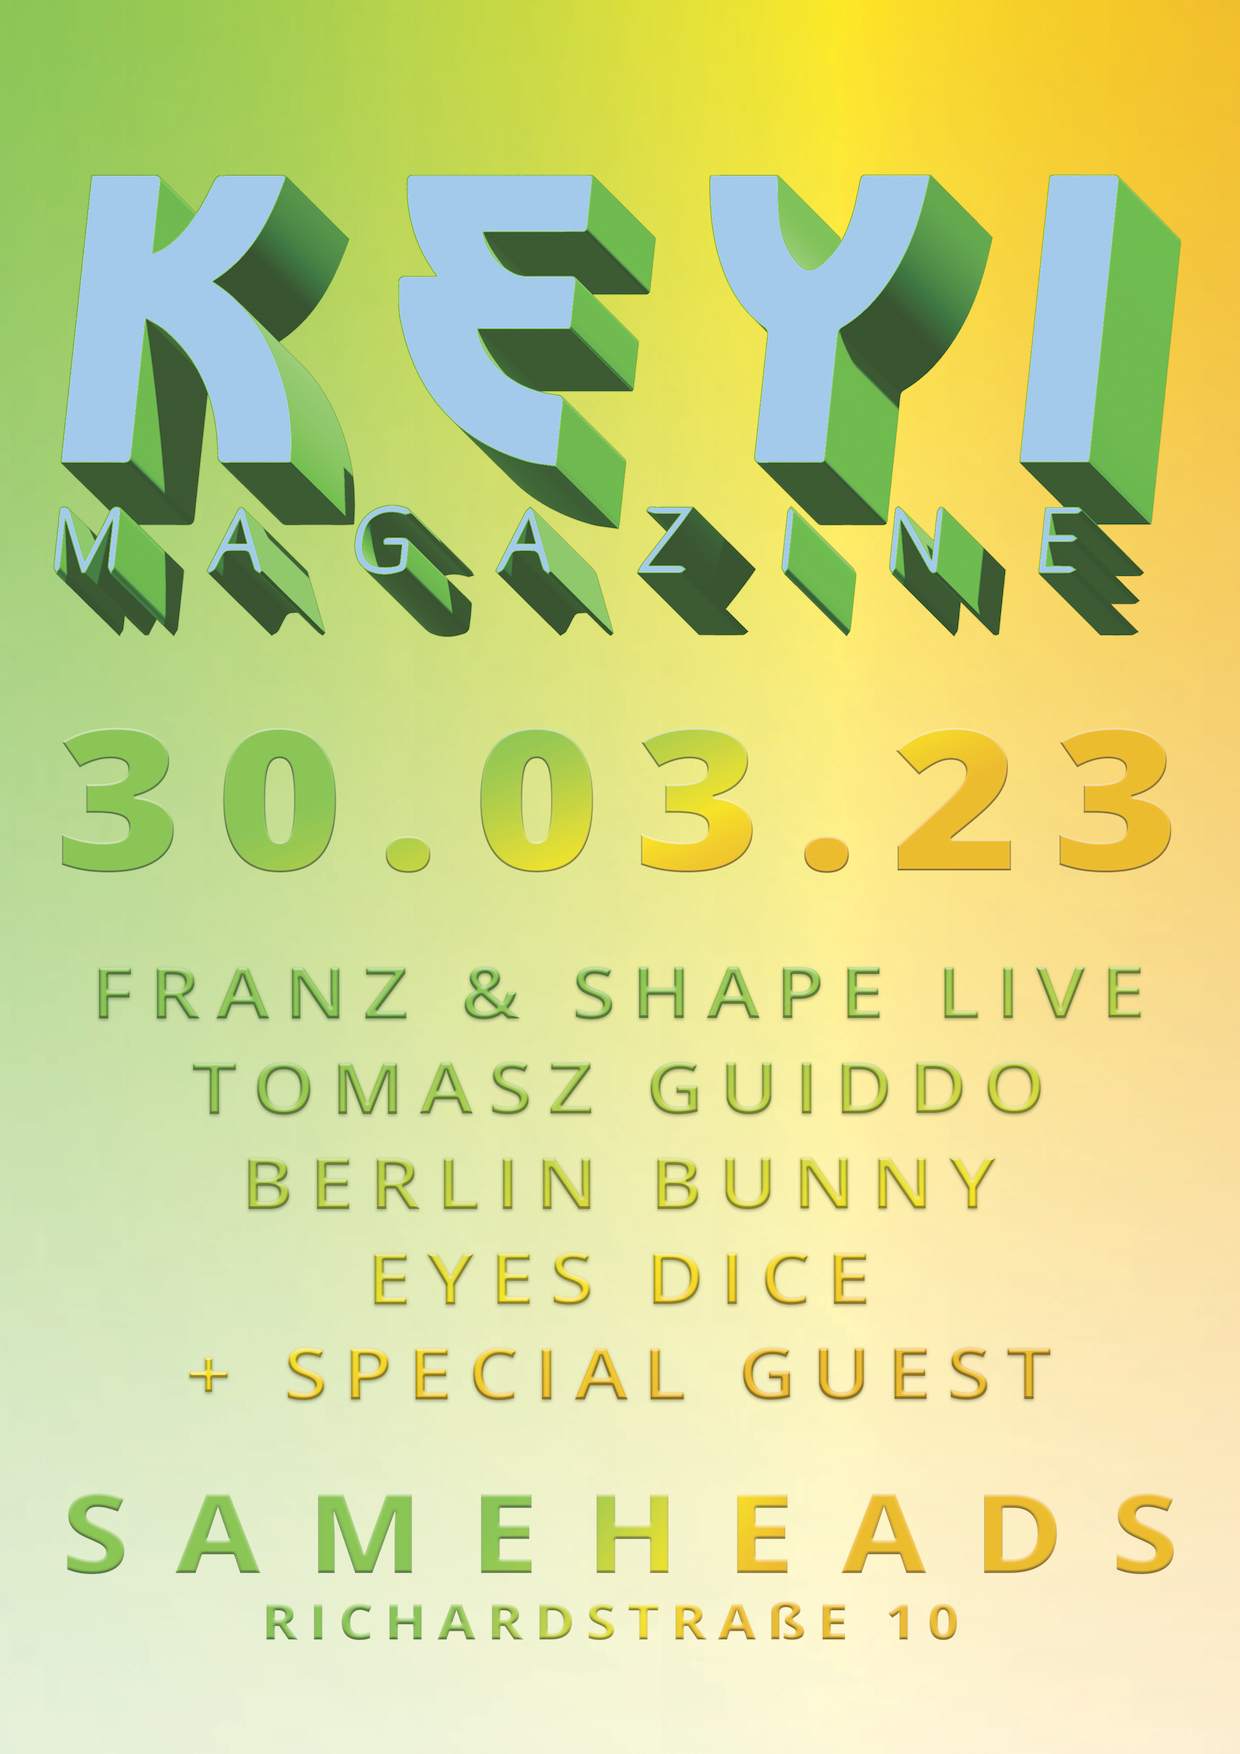 Keyi Magazine with Franz & Shape, Guiddo, Berlin Bunny, Eyes Dice & Special Guest - フライヤー表